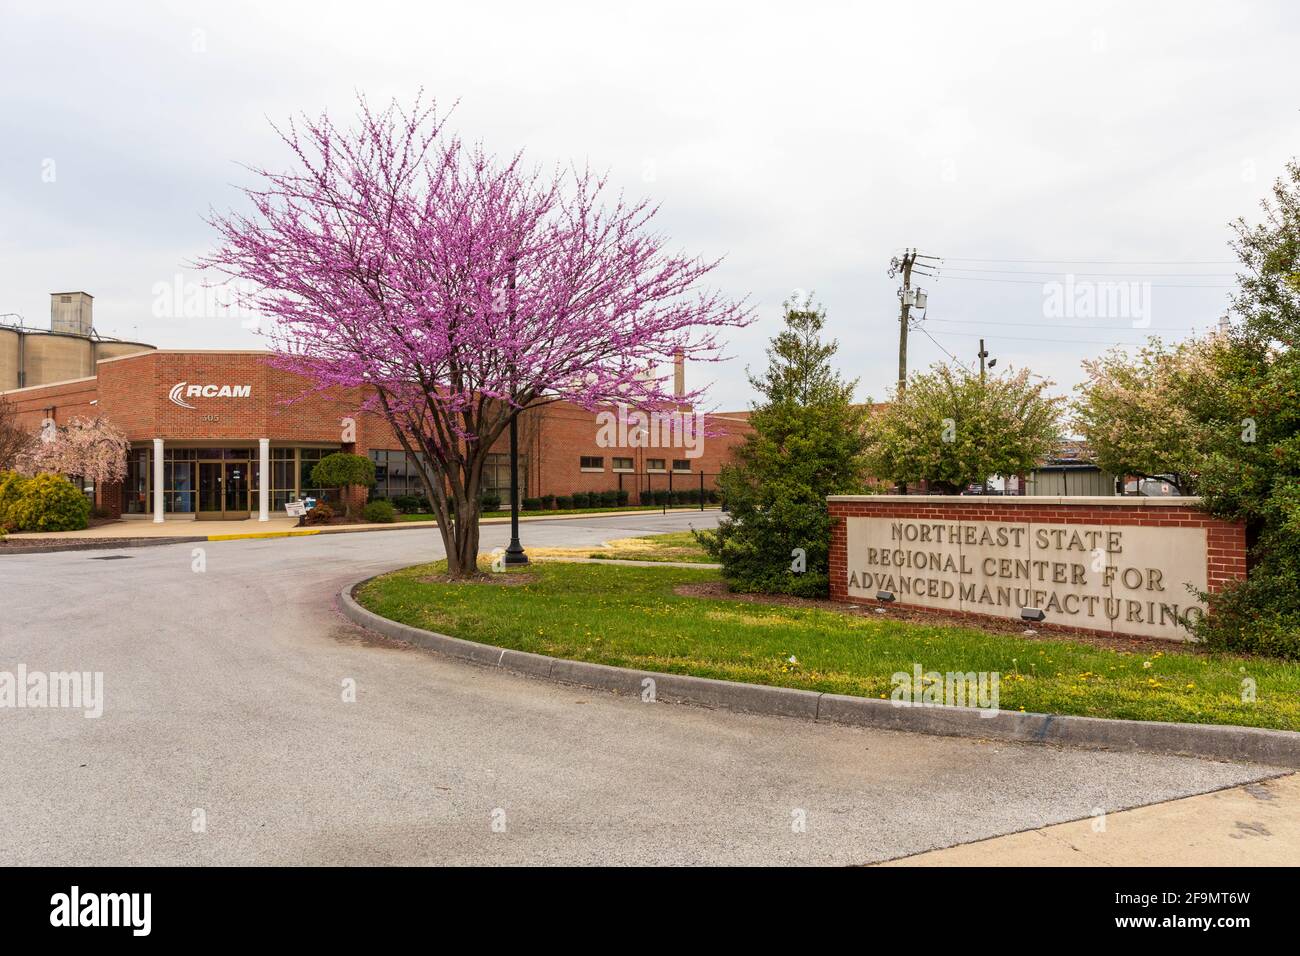 KINGSPORT, TN, USA--8 APRIL 2021: Northeast State Regional Center for Advanced Manufacturing, RCAM. Stock Photo